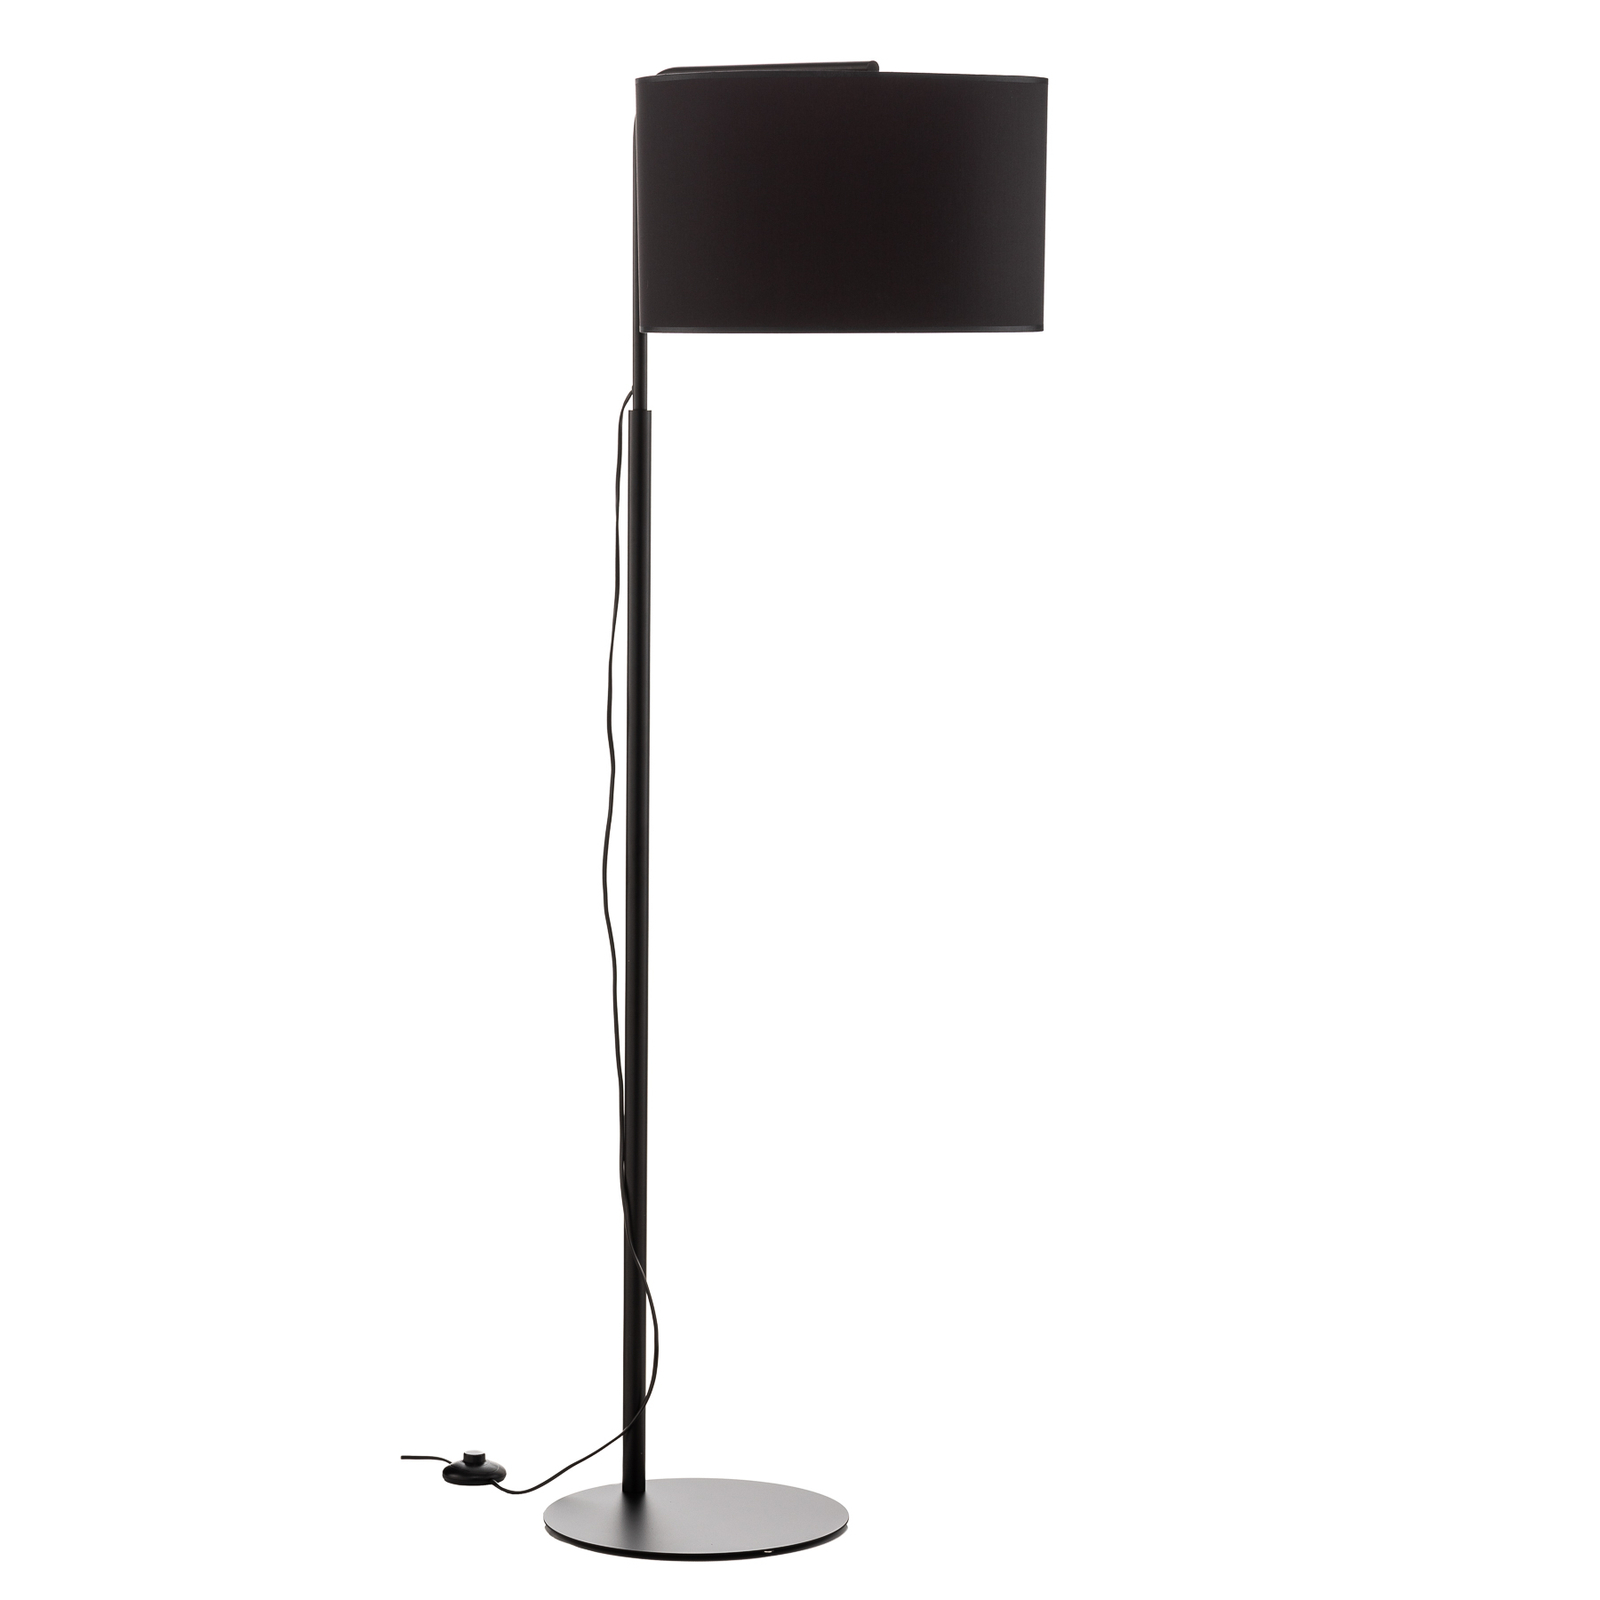 Soho floor lamp, cylindrical curved black/gold